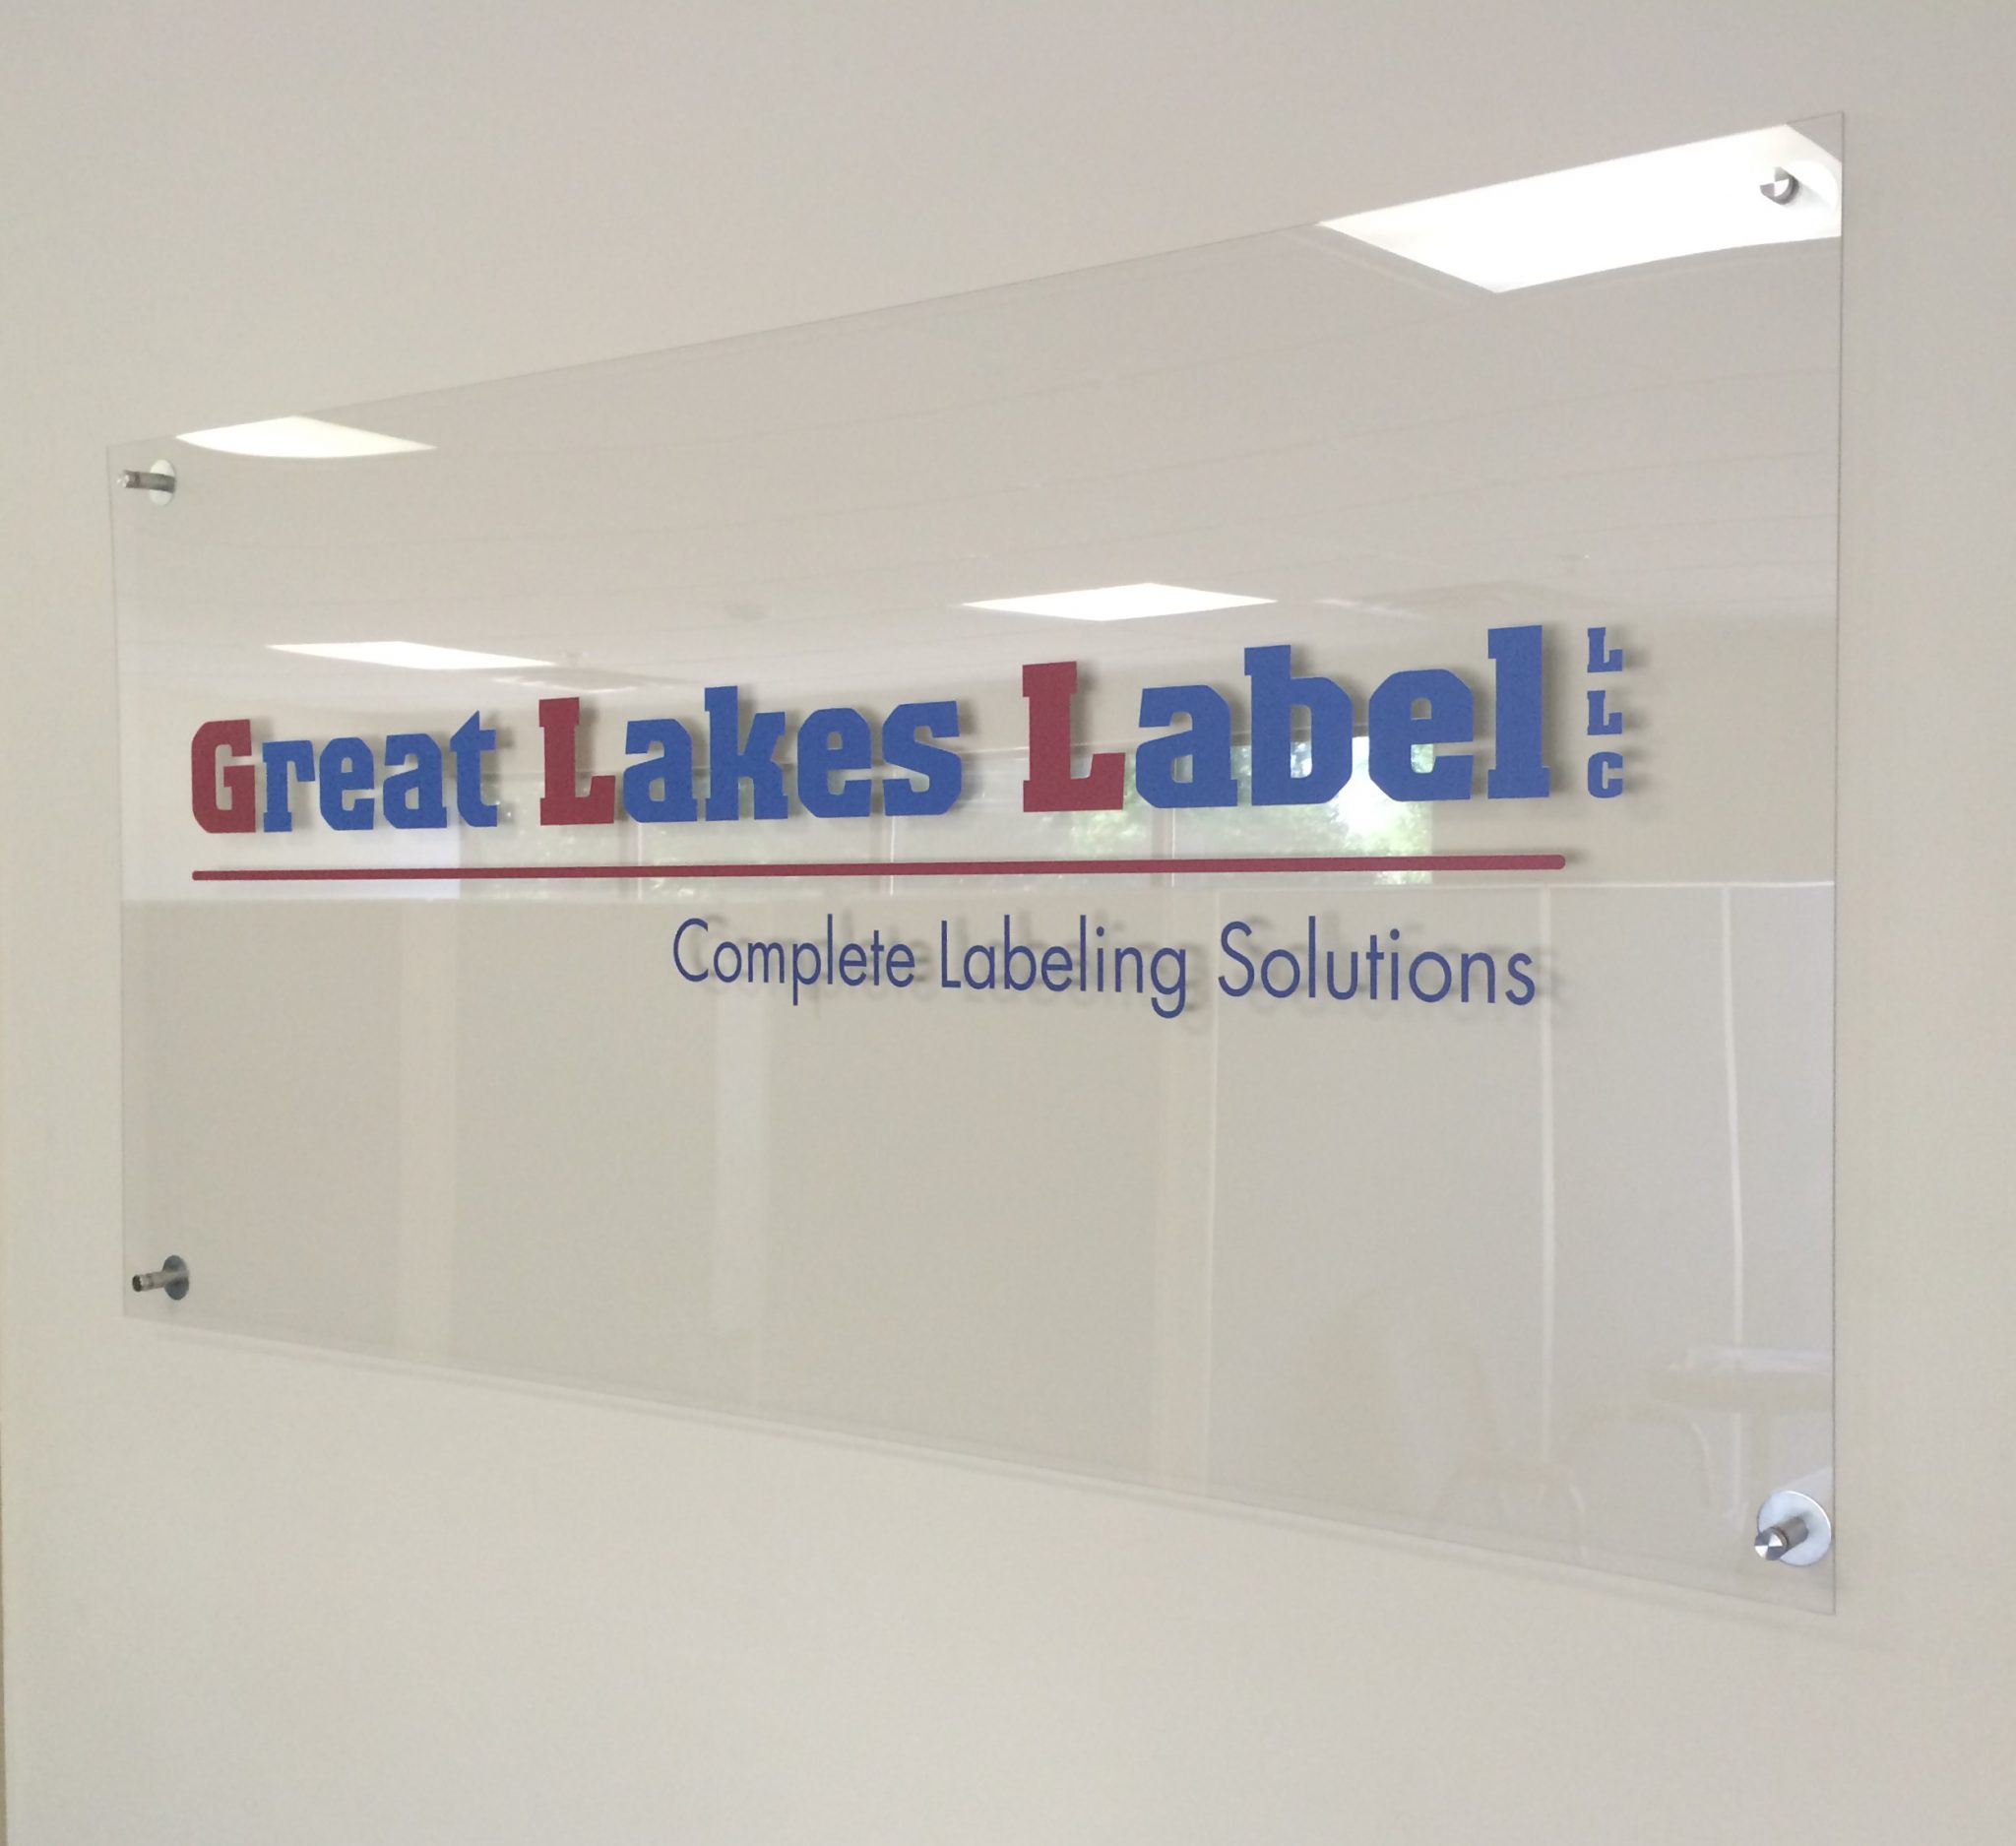 Great Lakes Label office sign (vision)